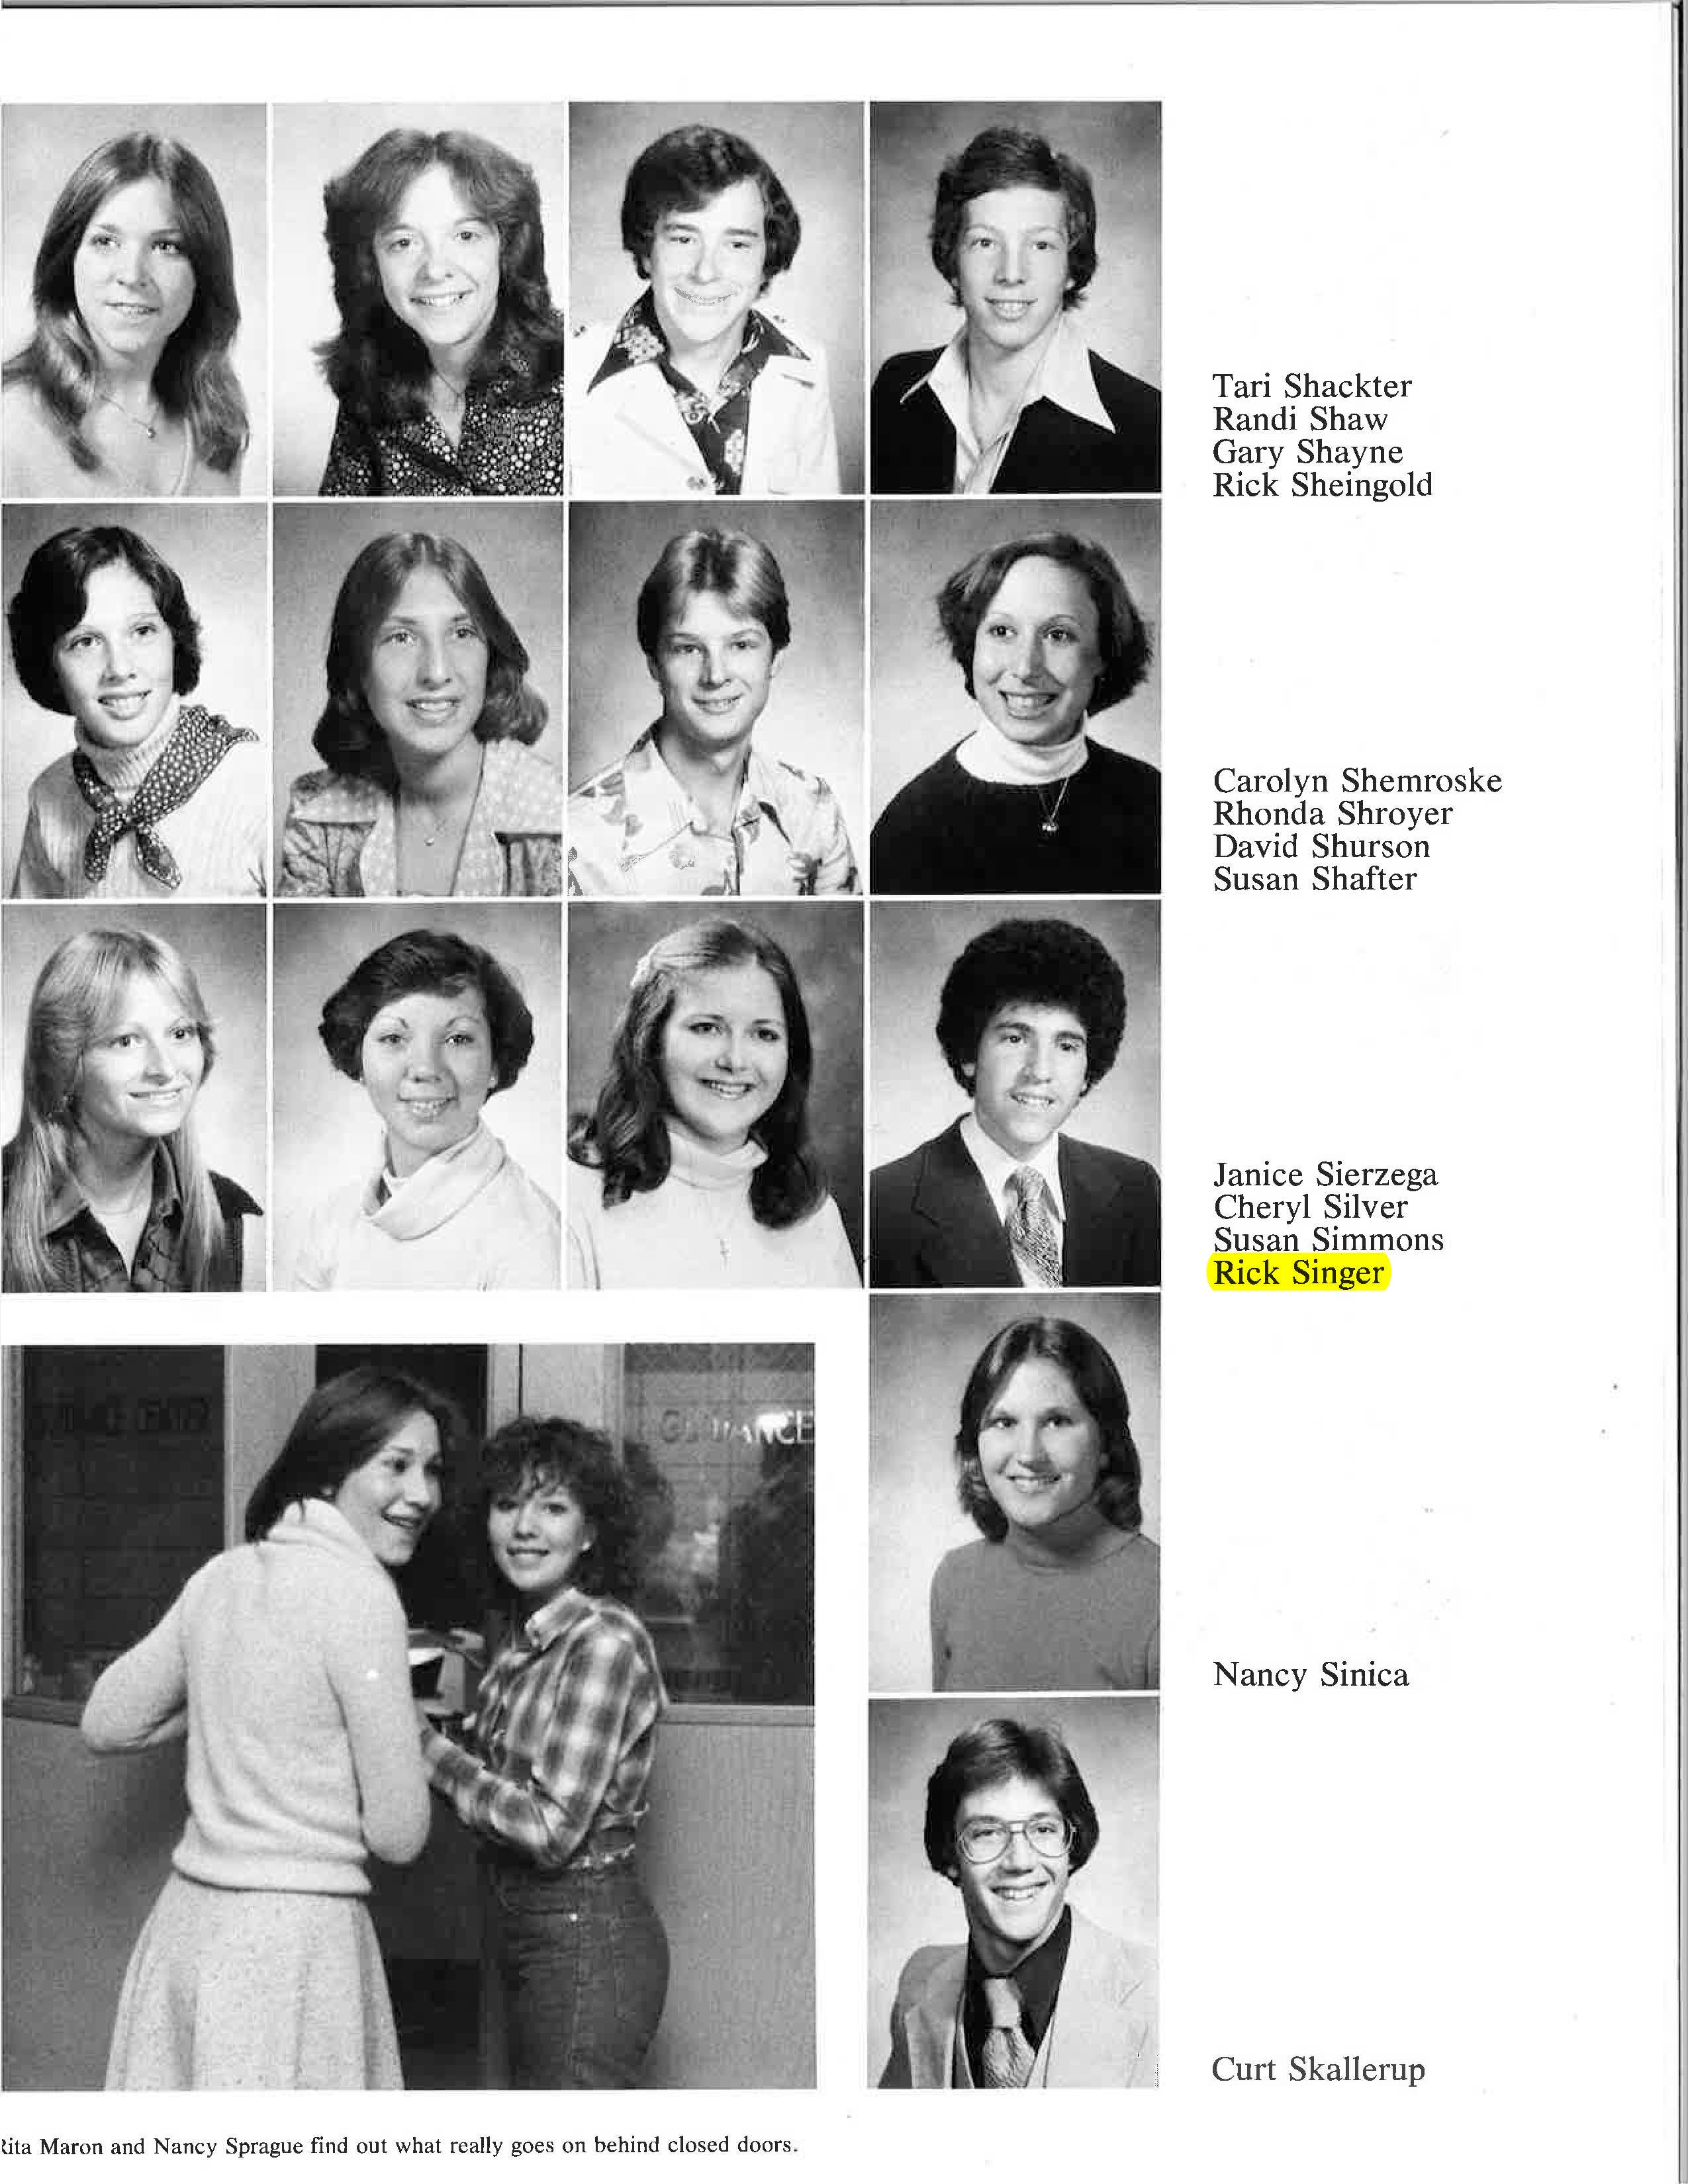 Niles West High School yearbook from 1978 featuring Rick Singer.